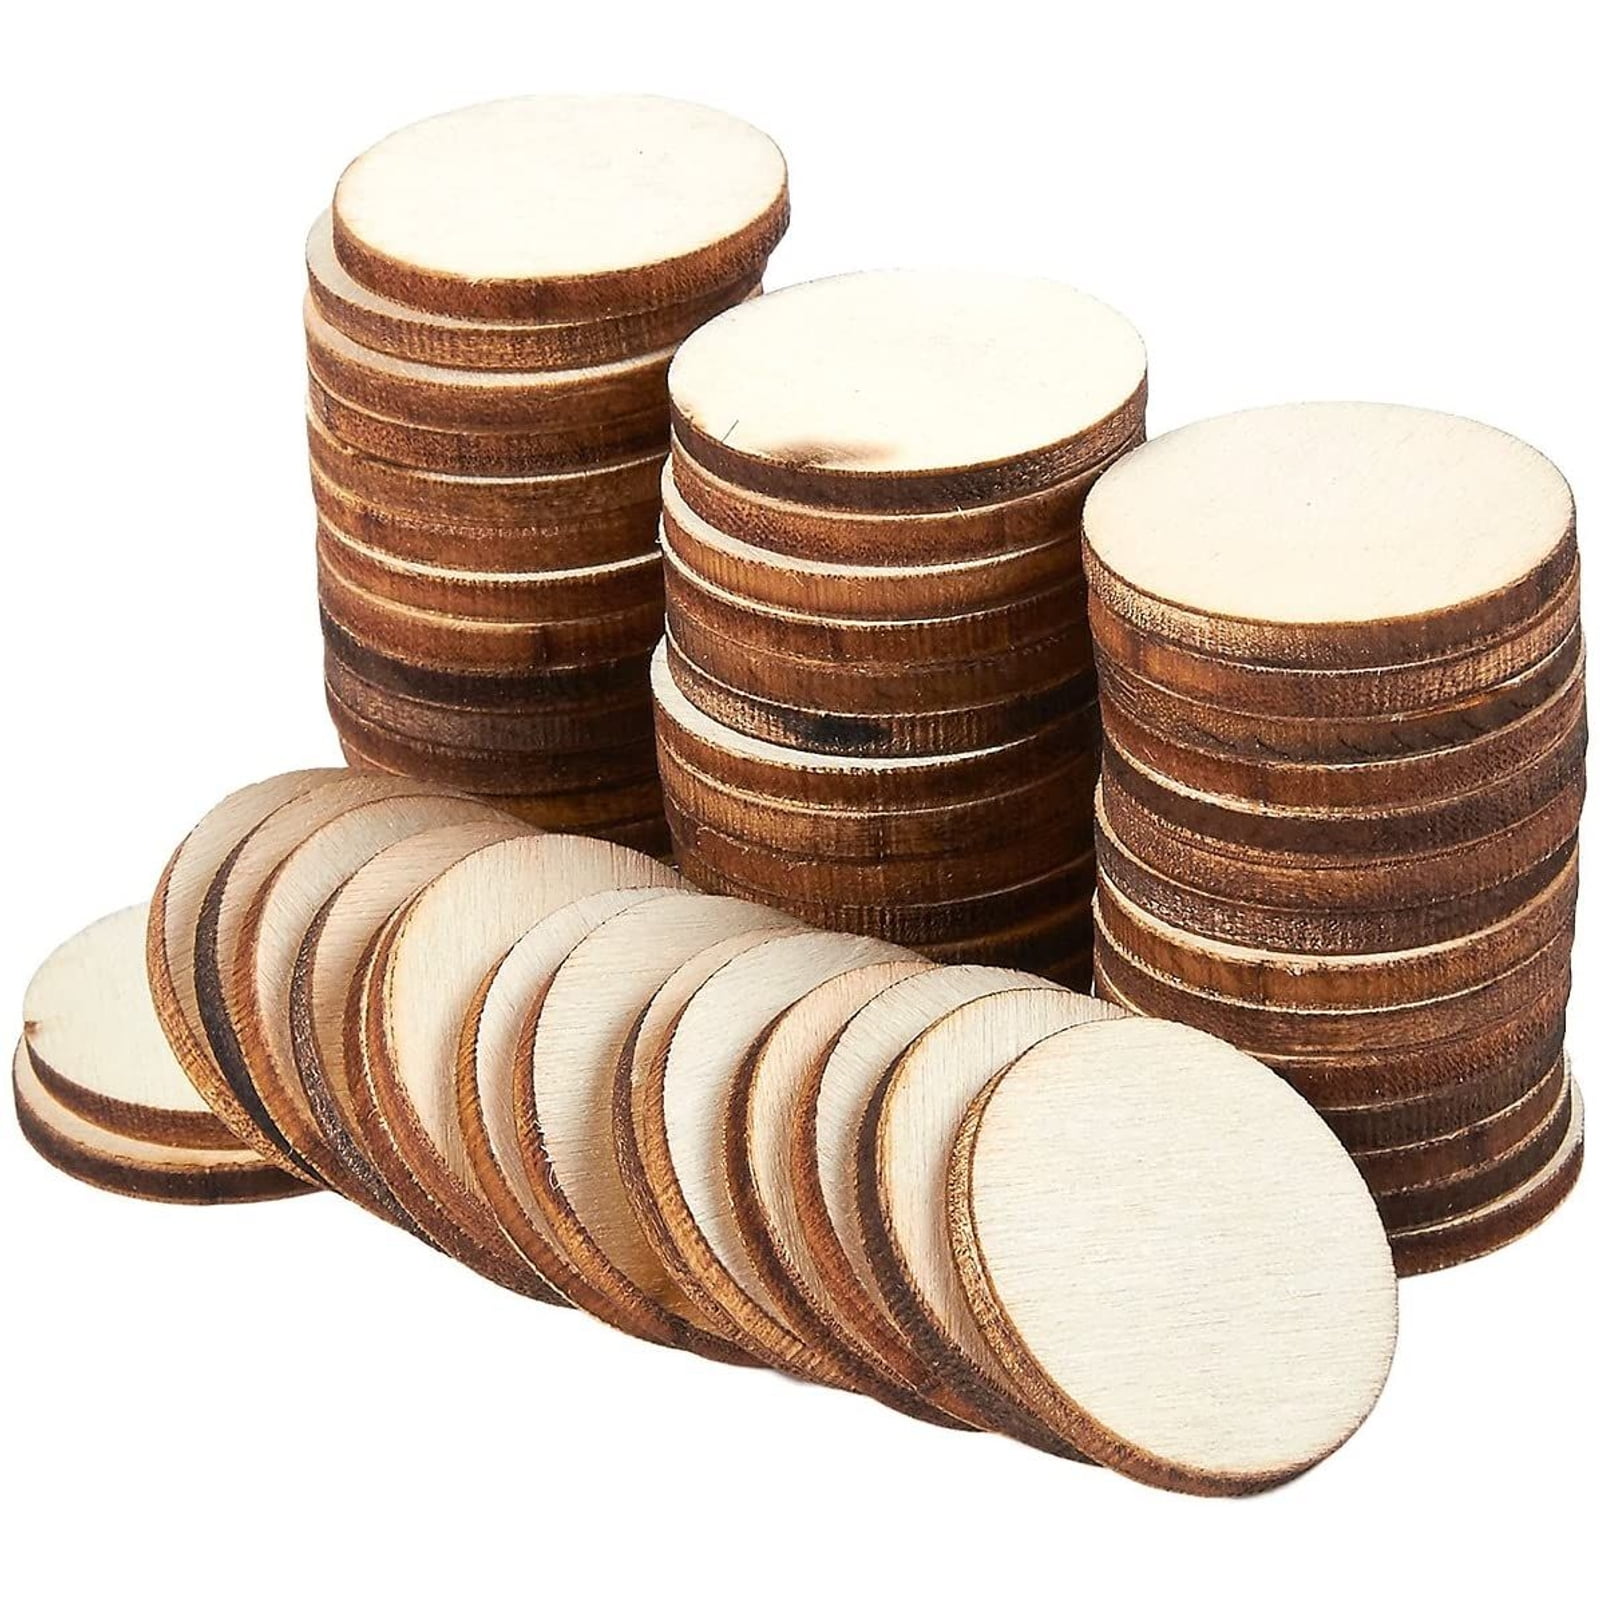 1 Inch 200 Pieces Unfinished Wood Slices Round Disc Circle Wood Pieces Wooden Cutouts Ornaments for Craft and Decoration